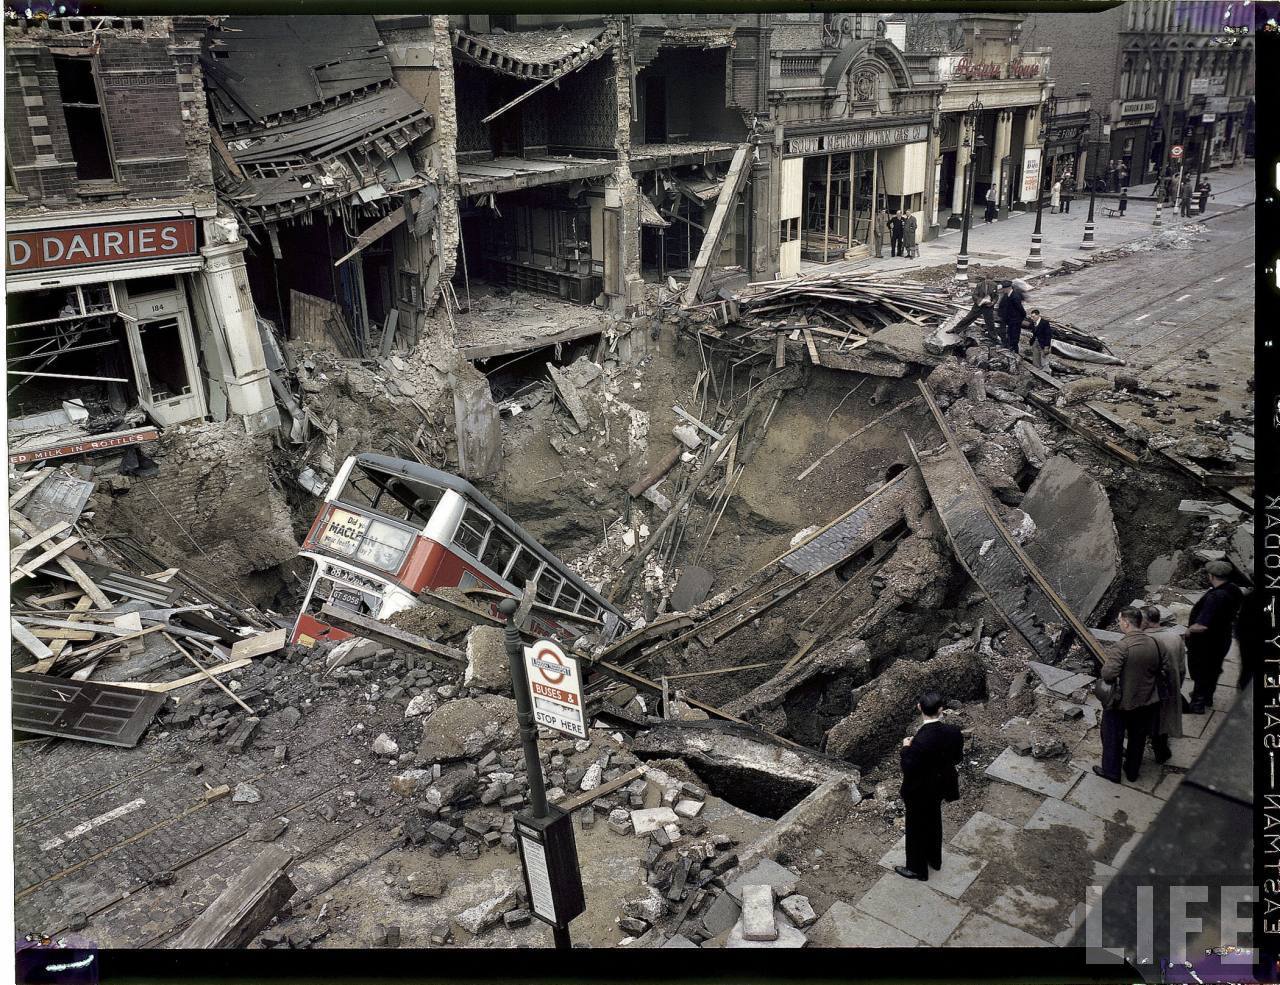 London Bus laying inside huge bomb crater after heavy German air raid bombing attacks